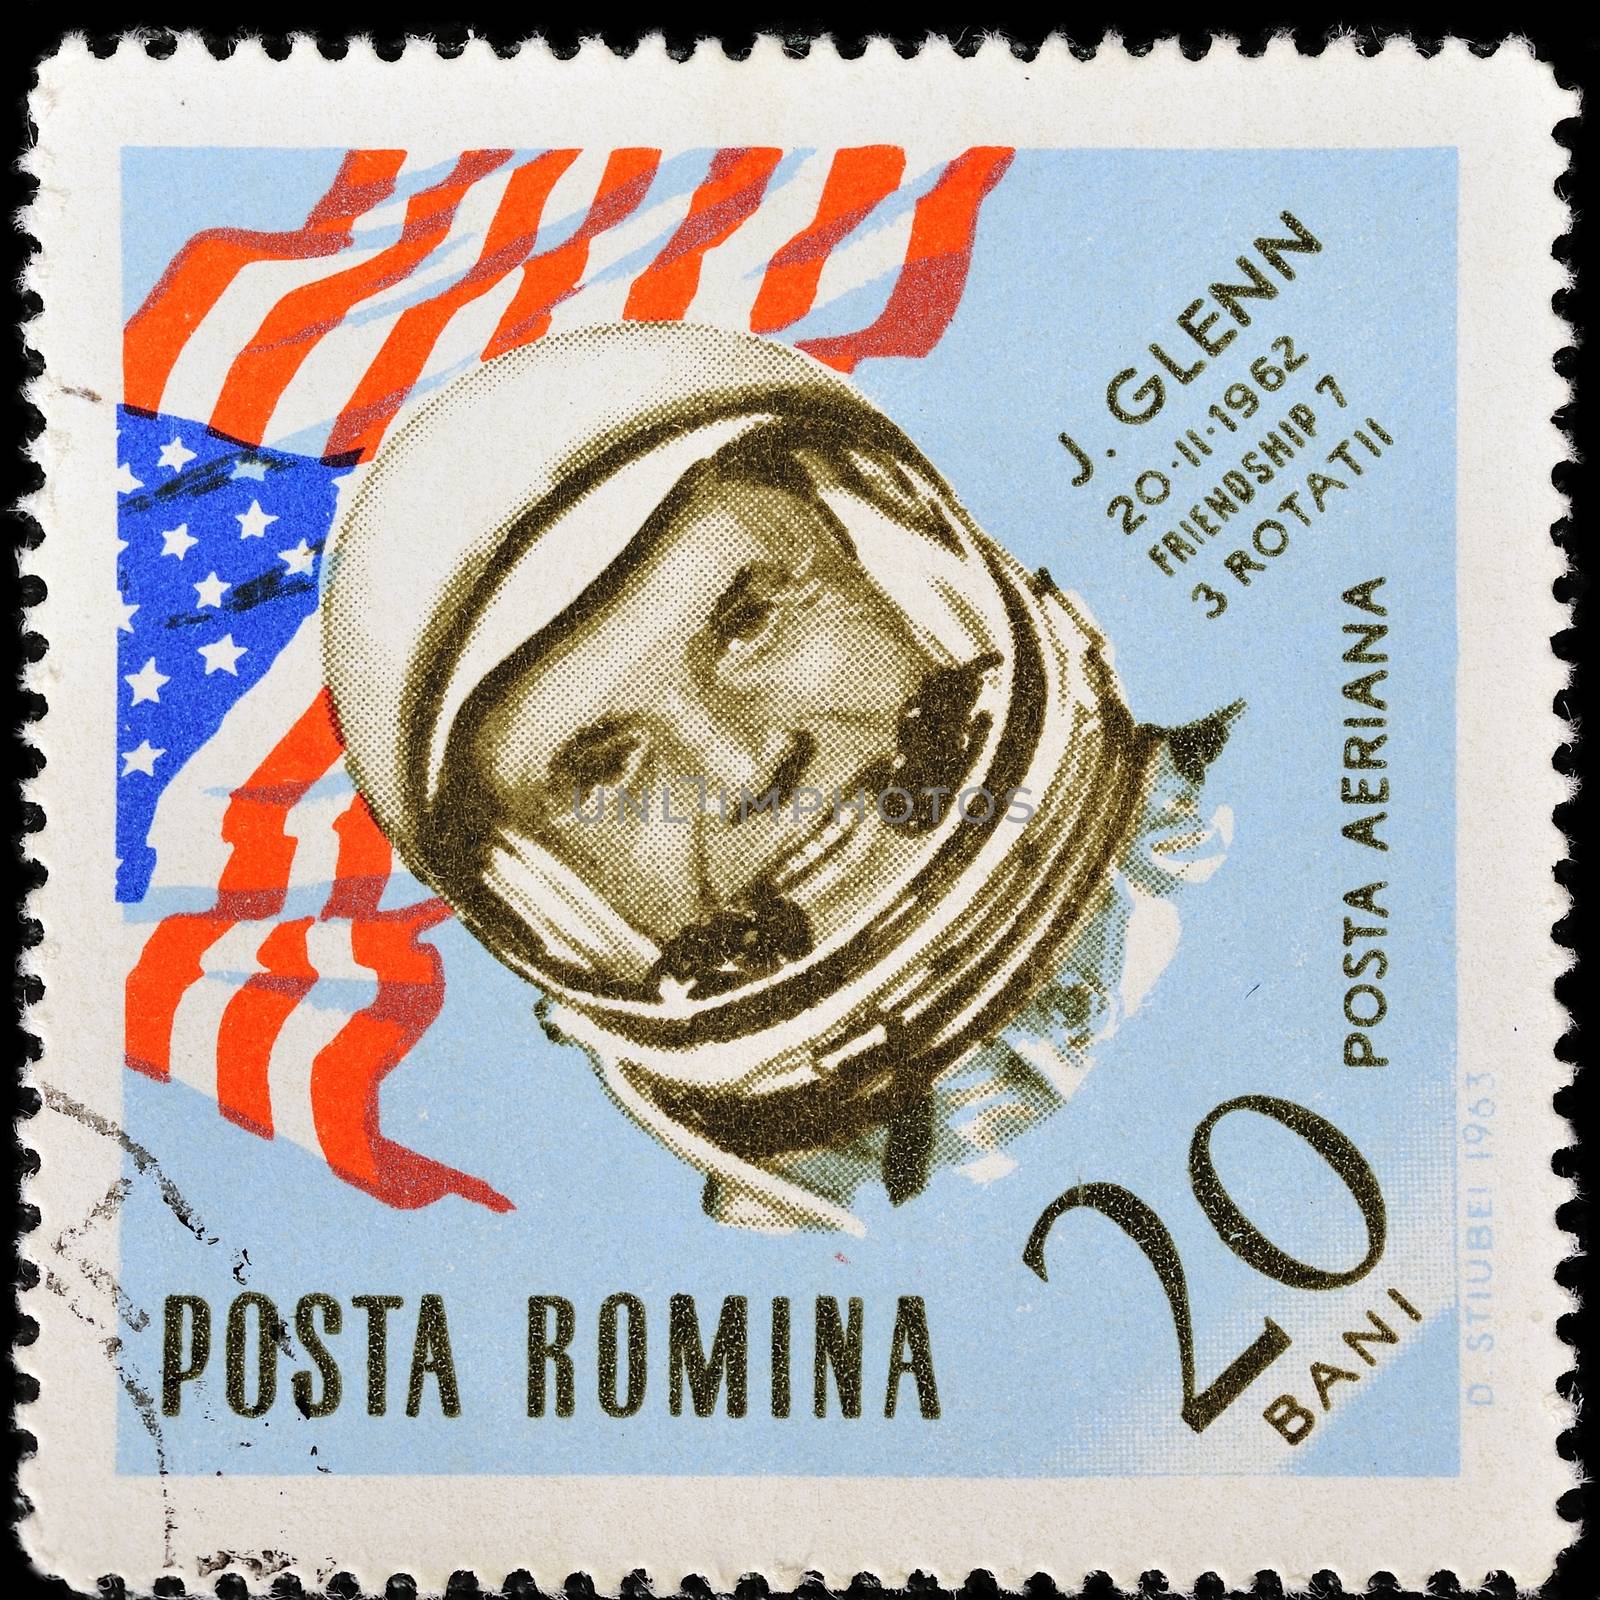 ROMANIA - CIRCA 1963: A stamp printed in Romania shows USA flag and portrait of astronaut John Glenn, with the same inscription, from the series "Space Navigation", circa 1963